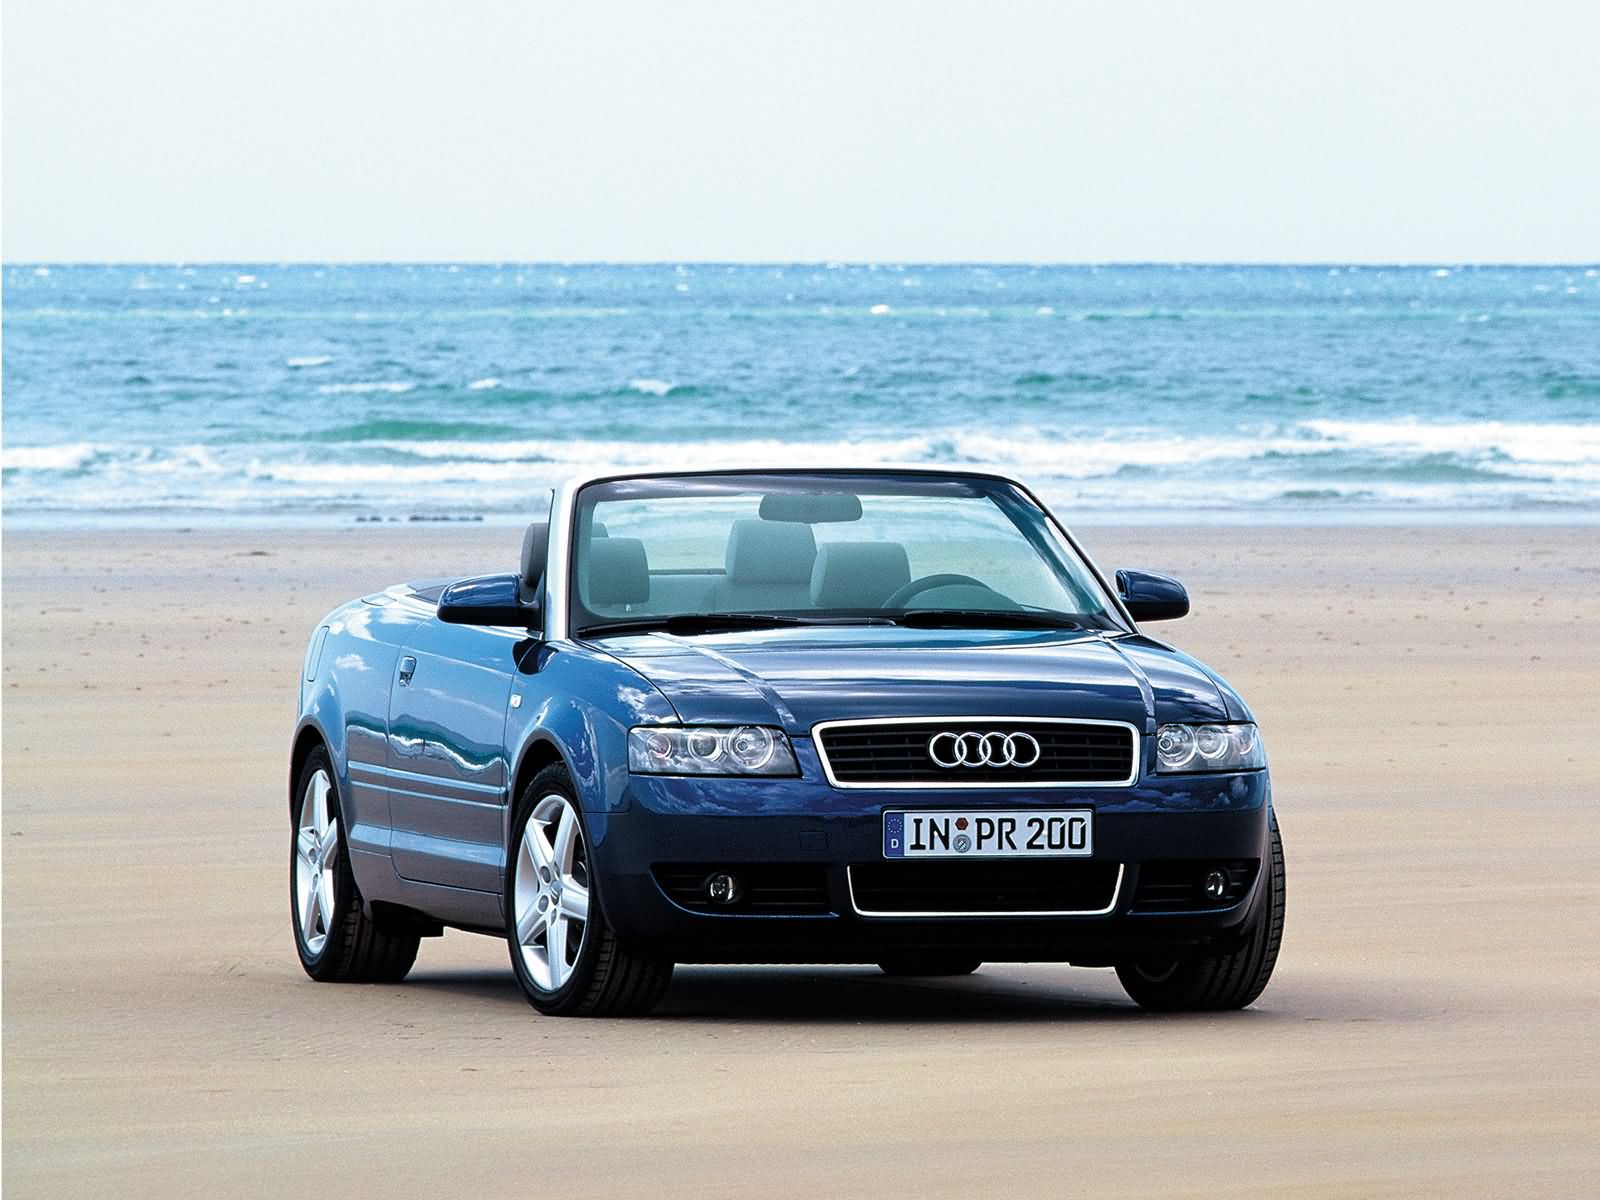 Audi Convertible on Audi A4 Cabriolet Photo Pic Wallpaper High Quality New Pic